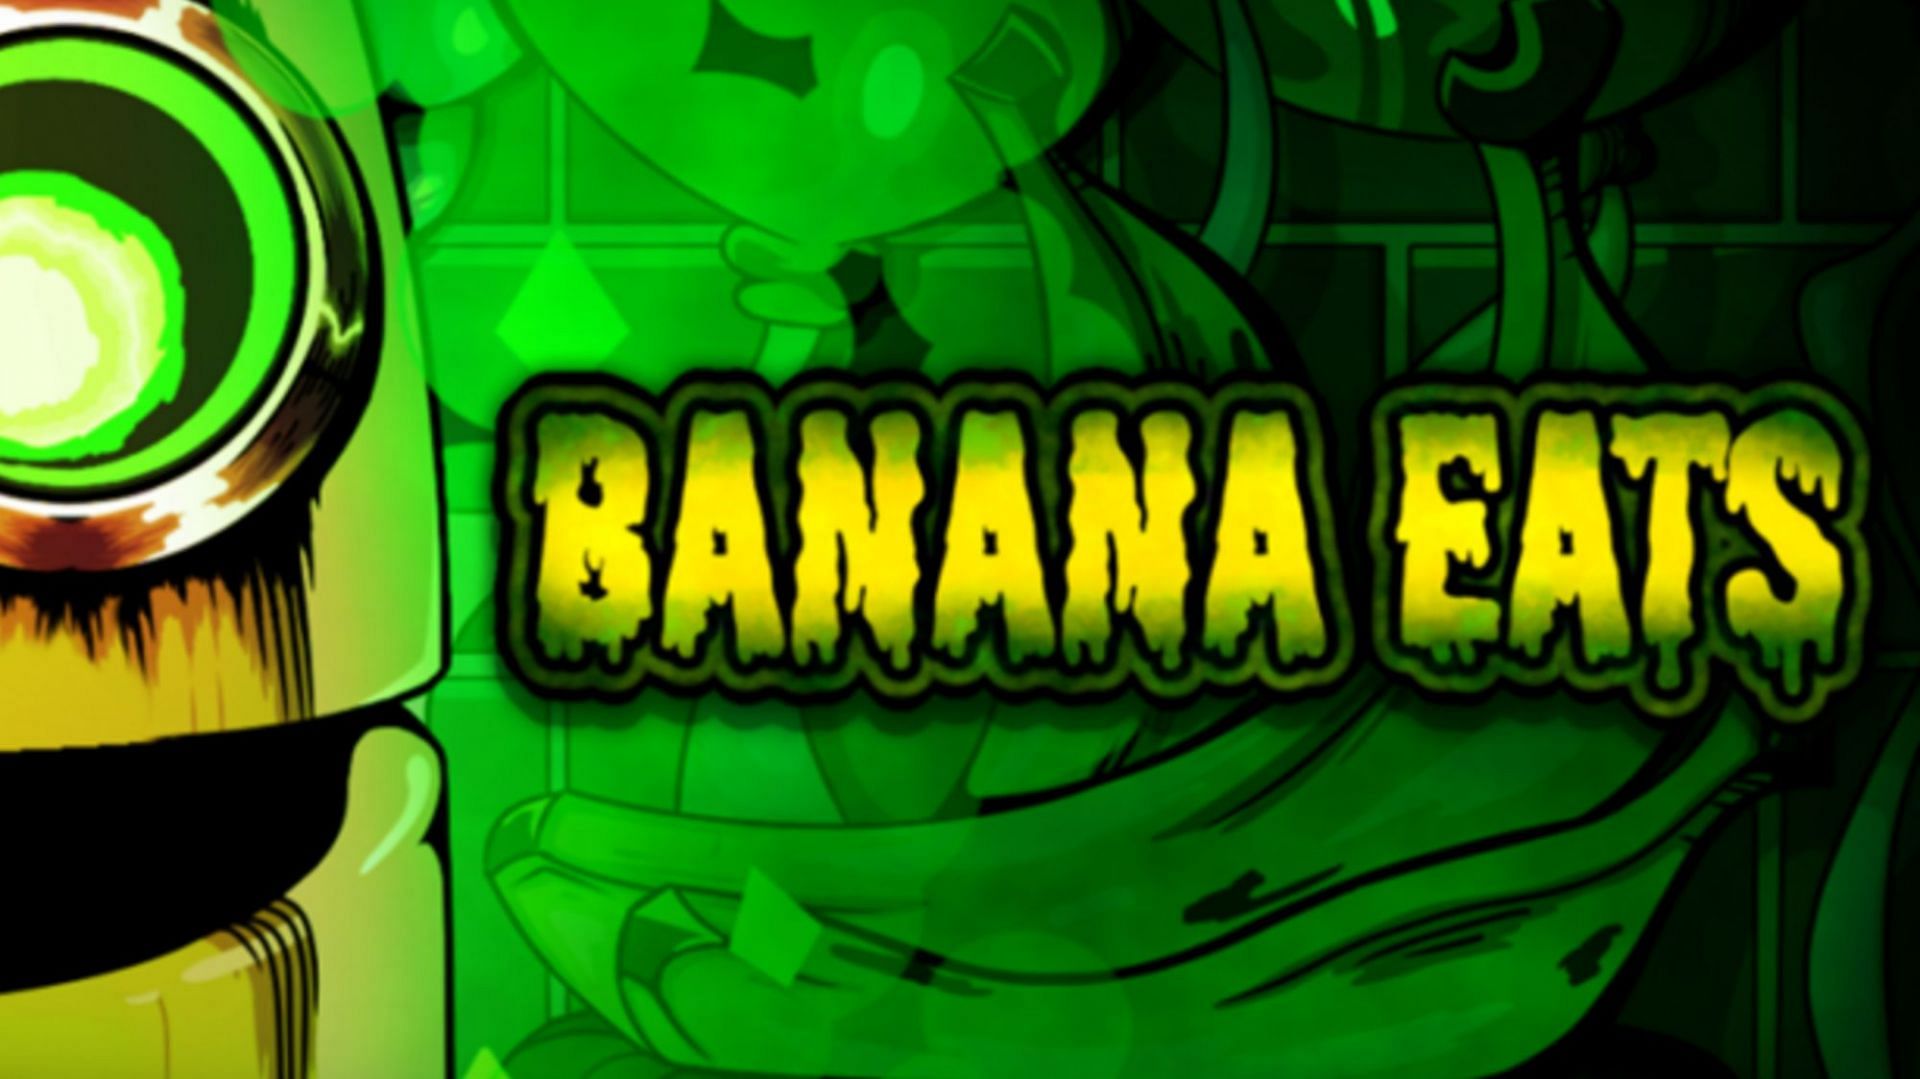 Players must escape the Banana monster in this Roblox game (Image via Roblox)